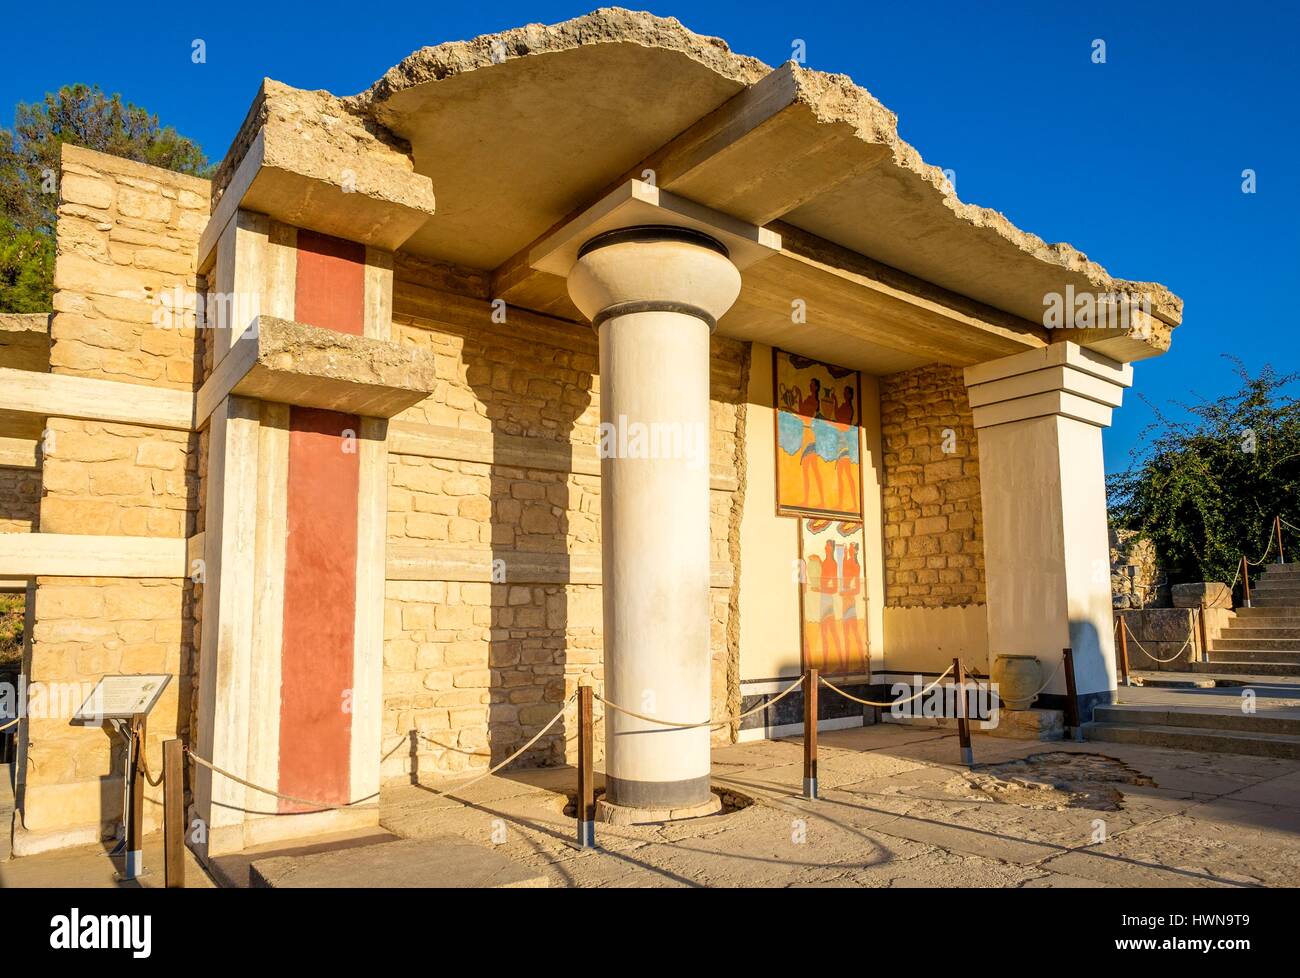 Greece, Crete, Heraklion, the archeological Minoan site of Knossos, South Propylaeum and the fresco of the Procession Stock Photo